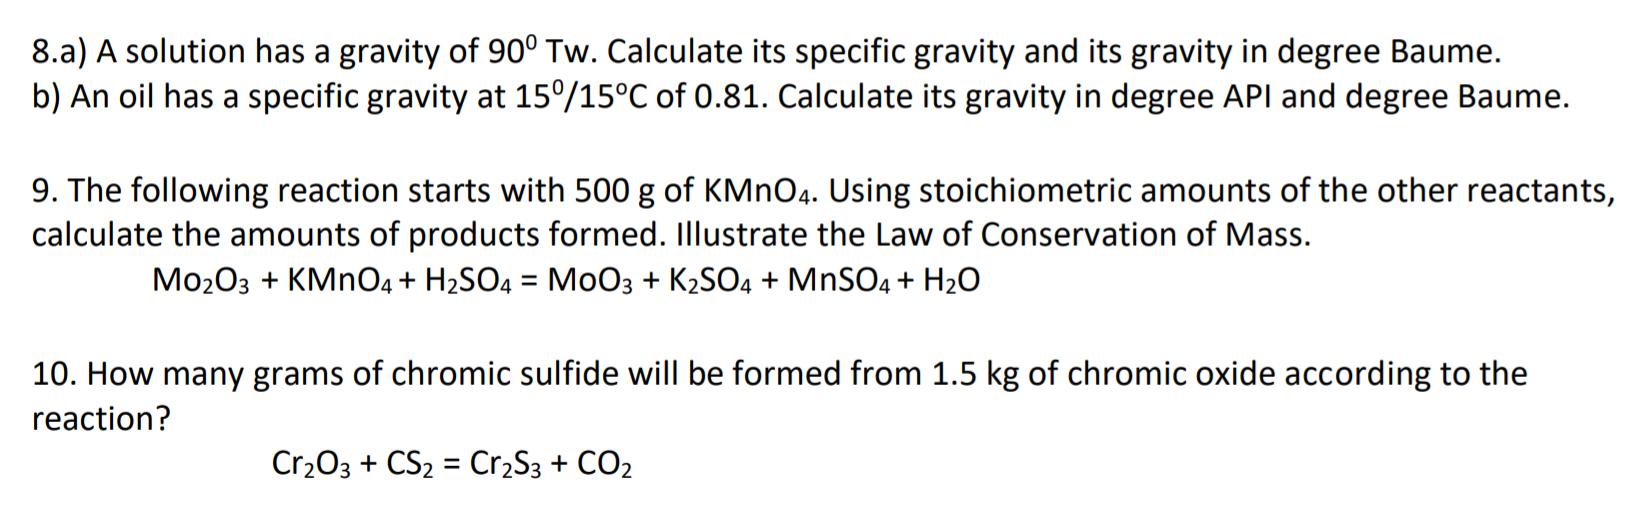 8.a) A solution has a gravity of 90° Tw. Calculate its specific gravity and its gravity in degree Baume.
b) An oil has a specific gravity at 15°/15°C of 0.81. Calculate its gravity in degree API and degree Baume.
9. The following reaction starts with 500 g of KMNO4. Using stoichiometric amounts of the other reactants,
calculate the amounts of products formed. Illustrate the Law of Conservation of Mass.
Mo203 + KMNO4 + H2SO4 = MoO3 + K2SO4 + MNSO4 + H2O
10. How many grams of chromic sulfide will be formed from 1.5 kg of chromic oxide according to the
reaction?
Cr203 + CS2 = Cr2S3 + CO2
%3D
